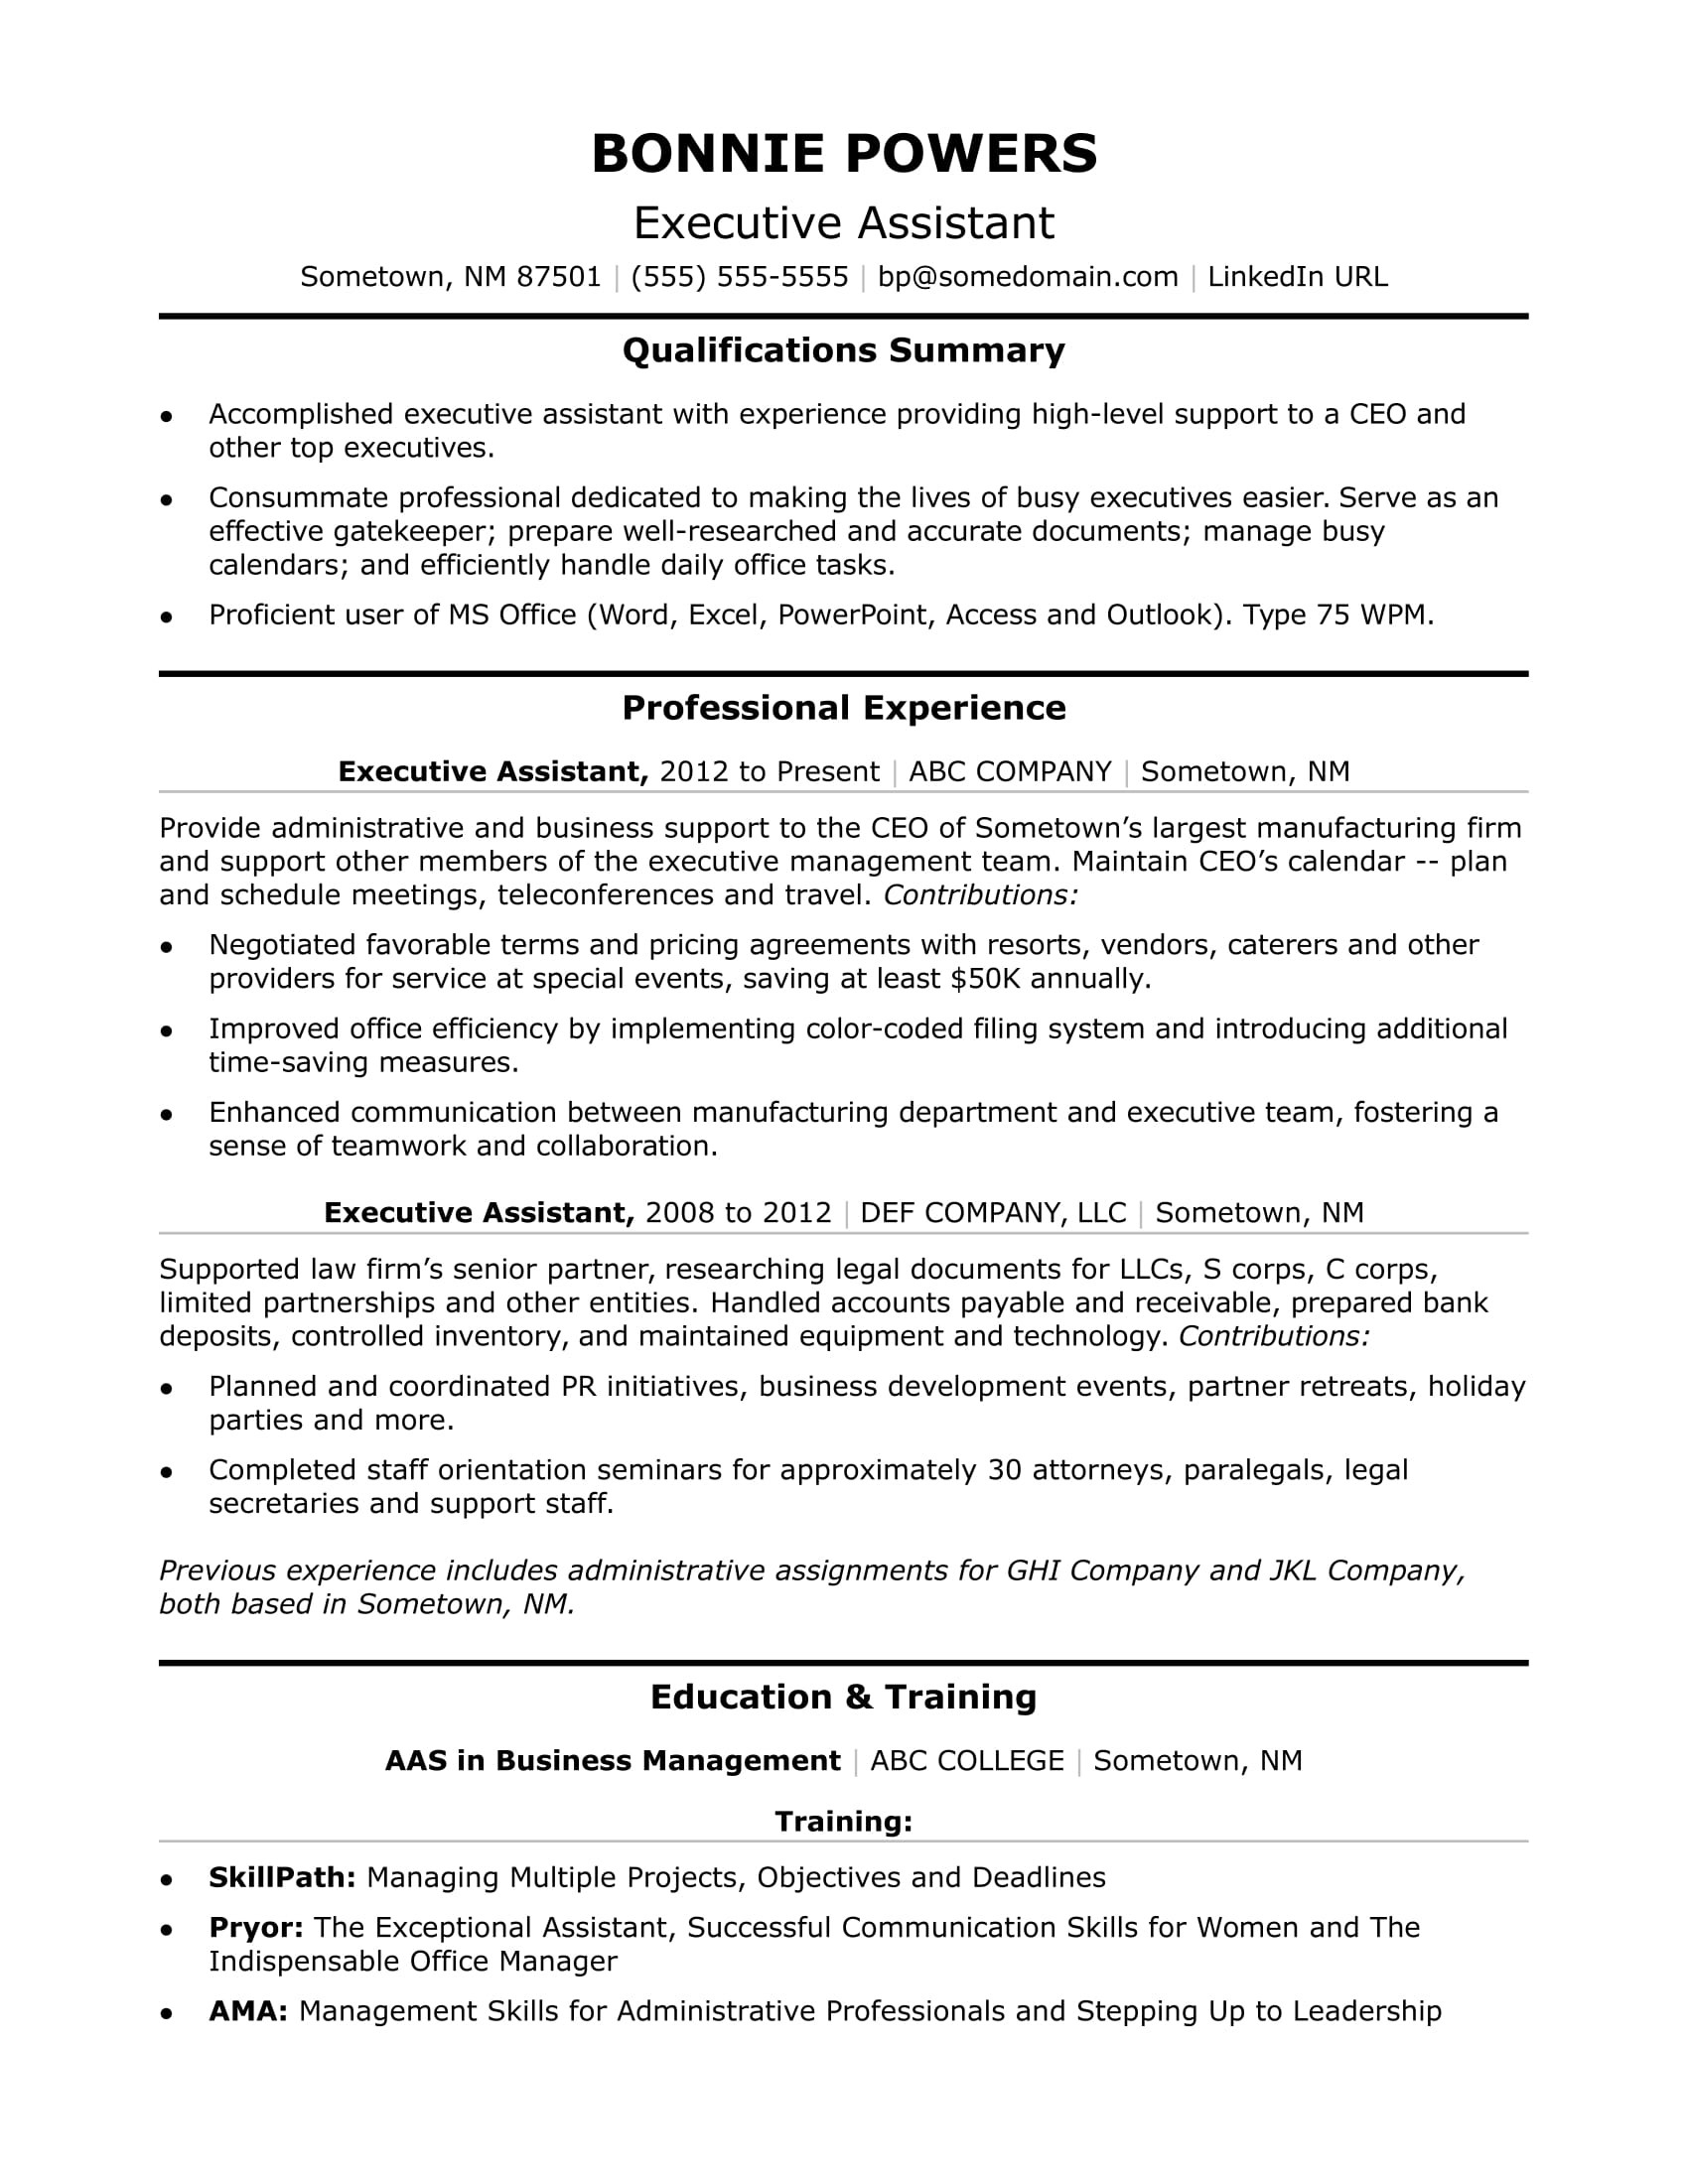 Resume Samples for Experienced Administrative assistants Executive assistant Resume Monster.com